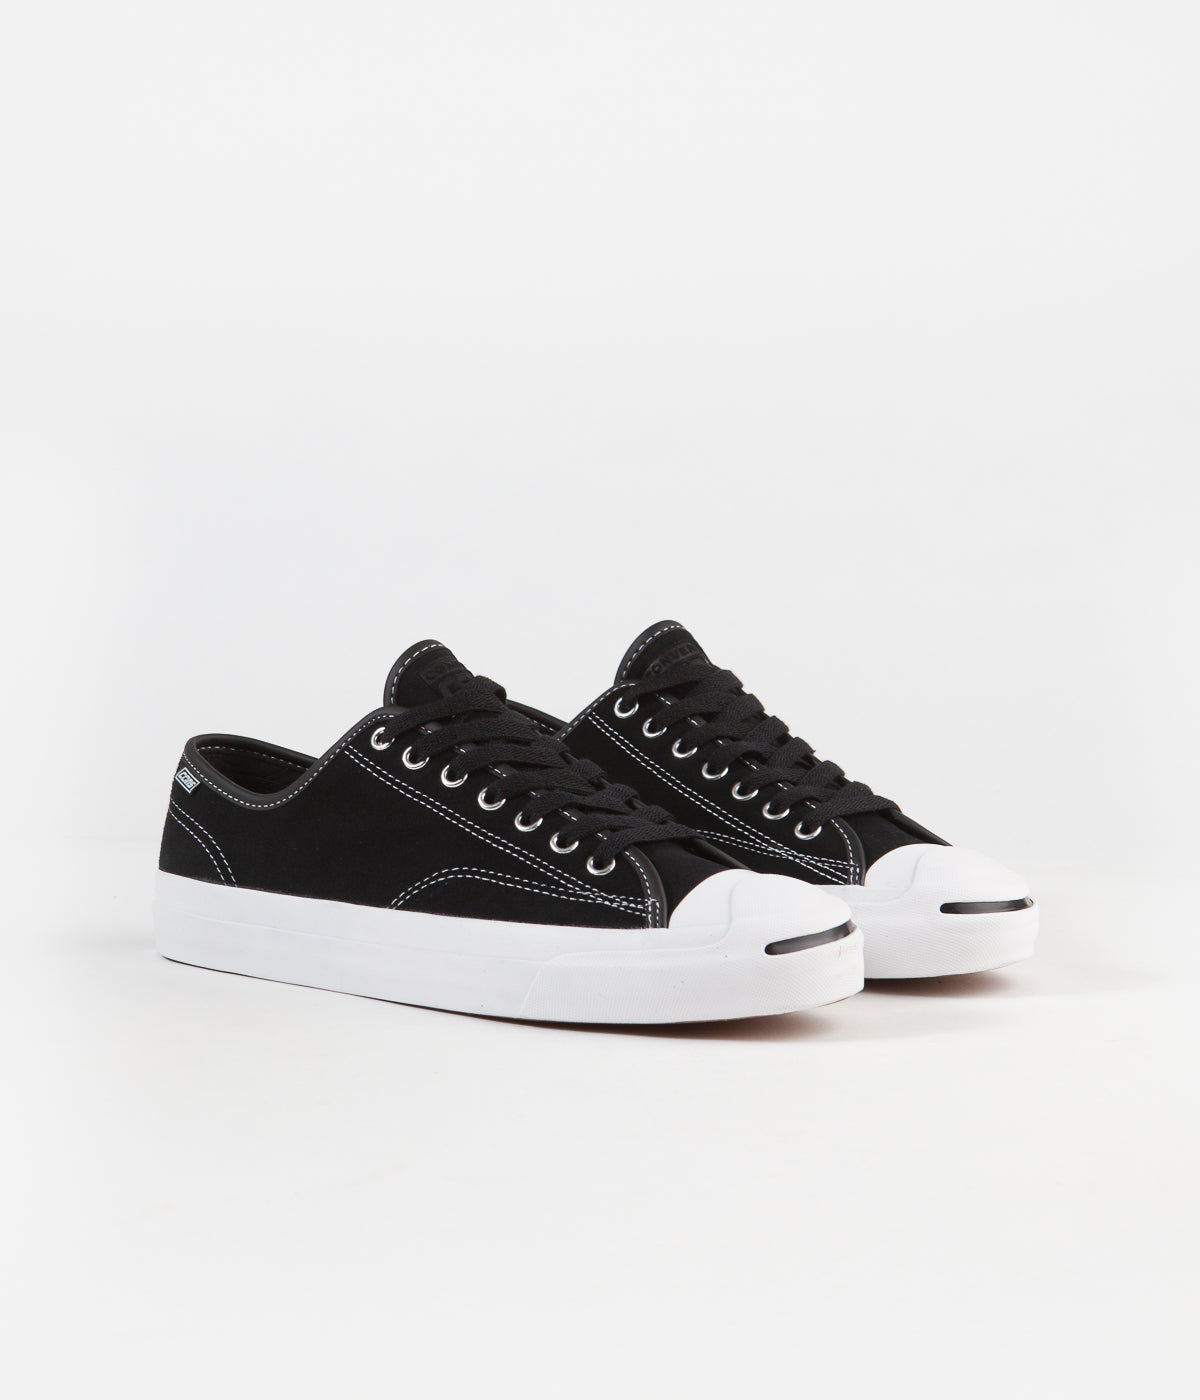 Converse Jack Purcell Pro Ox Shoes 